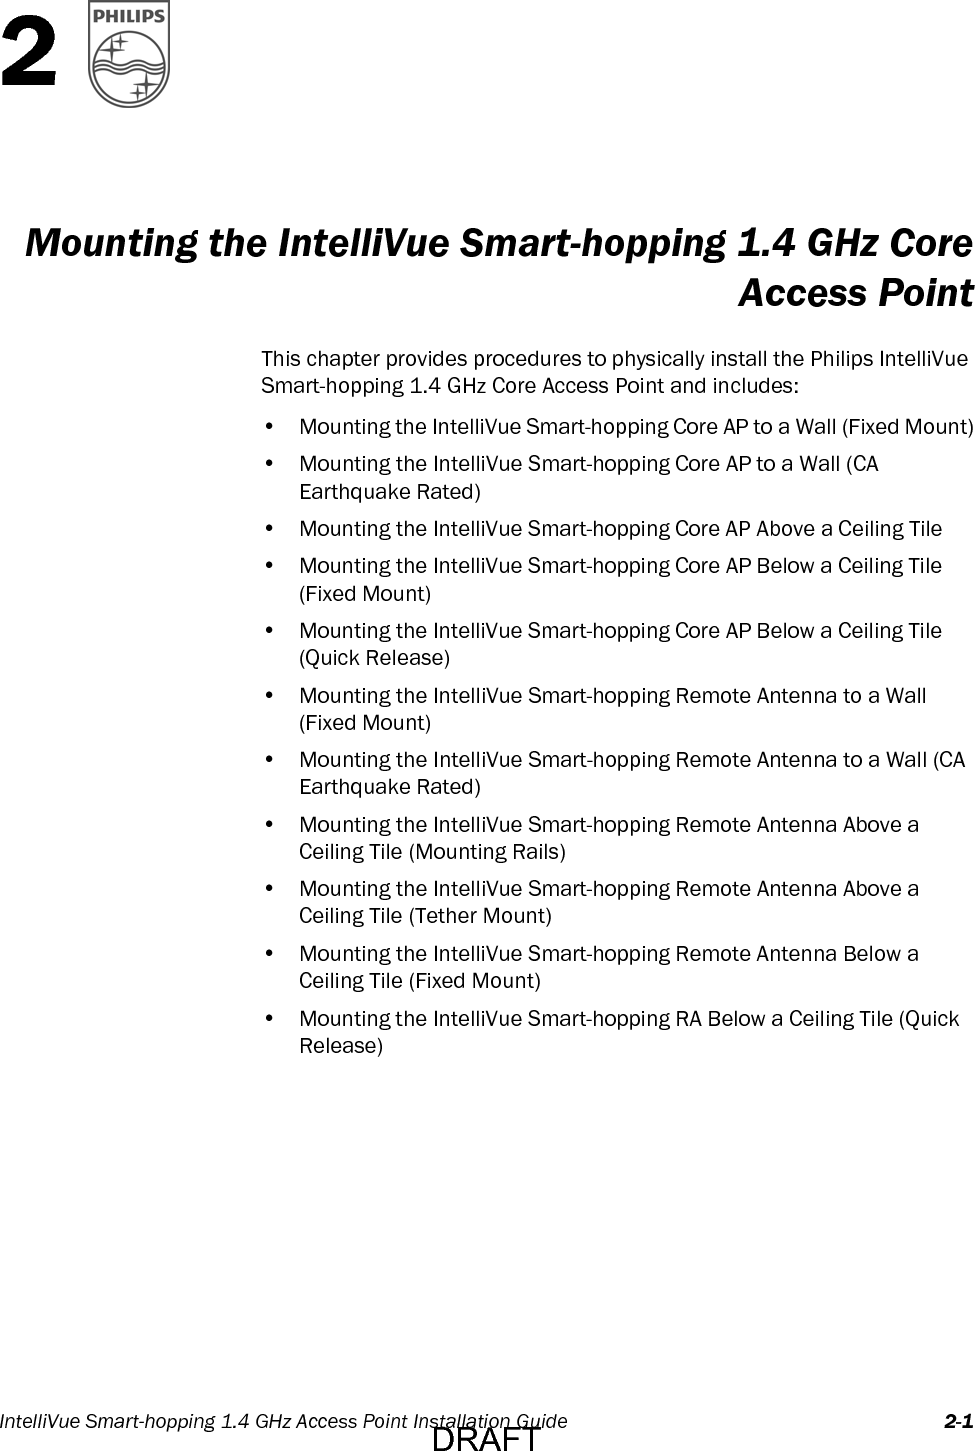 IntelliVue Smart-hopping 1.4 GHz Access Point Installation Guide 2-12Mounting the IntelliVue Smart-hopping 1.4 GHz CoreAccess PointThis chapter provides procedures to physically install the Philips IntelliVue Smart-hopping 1.4 GHz Core Access Point and includes:• Mounting the IntelliVue Smart-hopping Core AP to a Wall (Fixed Mount)• Mounting the IntelliVue Smart-hopping Core AP to a Wall (CA Earthquake Rated)• Mounting the IntelliVue Smart-hopping Core AP Above a Ceiling Tile• Mounting the IntelliVue Smart-hopping Core AP Below a Ceiling Tile (Fixed Mount)• Mounting the IntelliVue Smart-hopping Core AP Below a Ceiling Tile (Quick Release)• Mounting the IntelliVue Smart-hopping Remote Antenna to a Wall (Fixed Mount)• Mounting the IntelliVue Smart-hopping Remote Antenna to a Wall (CA Earthquake Rated)• Mounting the IntelliVue Smart-hopping Remote Antenna Above a Ceiling Tile (Mounting Rails)• Mounting the IntelliVue Smart-hopping Remote Antenna Above a Ceiling Tile (Tether Mount)• Mounting the IntelliVue Smart-hopping Remote Antenna Below a Ceiling Tile (Fixed Mount)• Mounting the IntelliVue Smart-hopping RA Below a Ceiling Tile (Quick Release)DRAFT